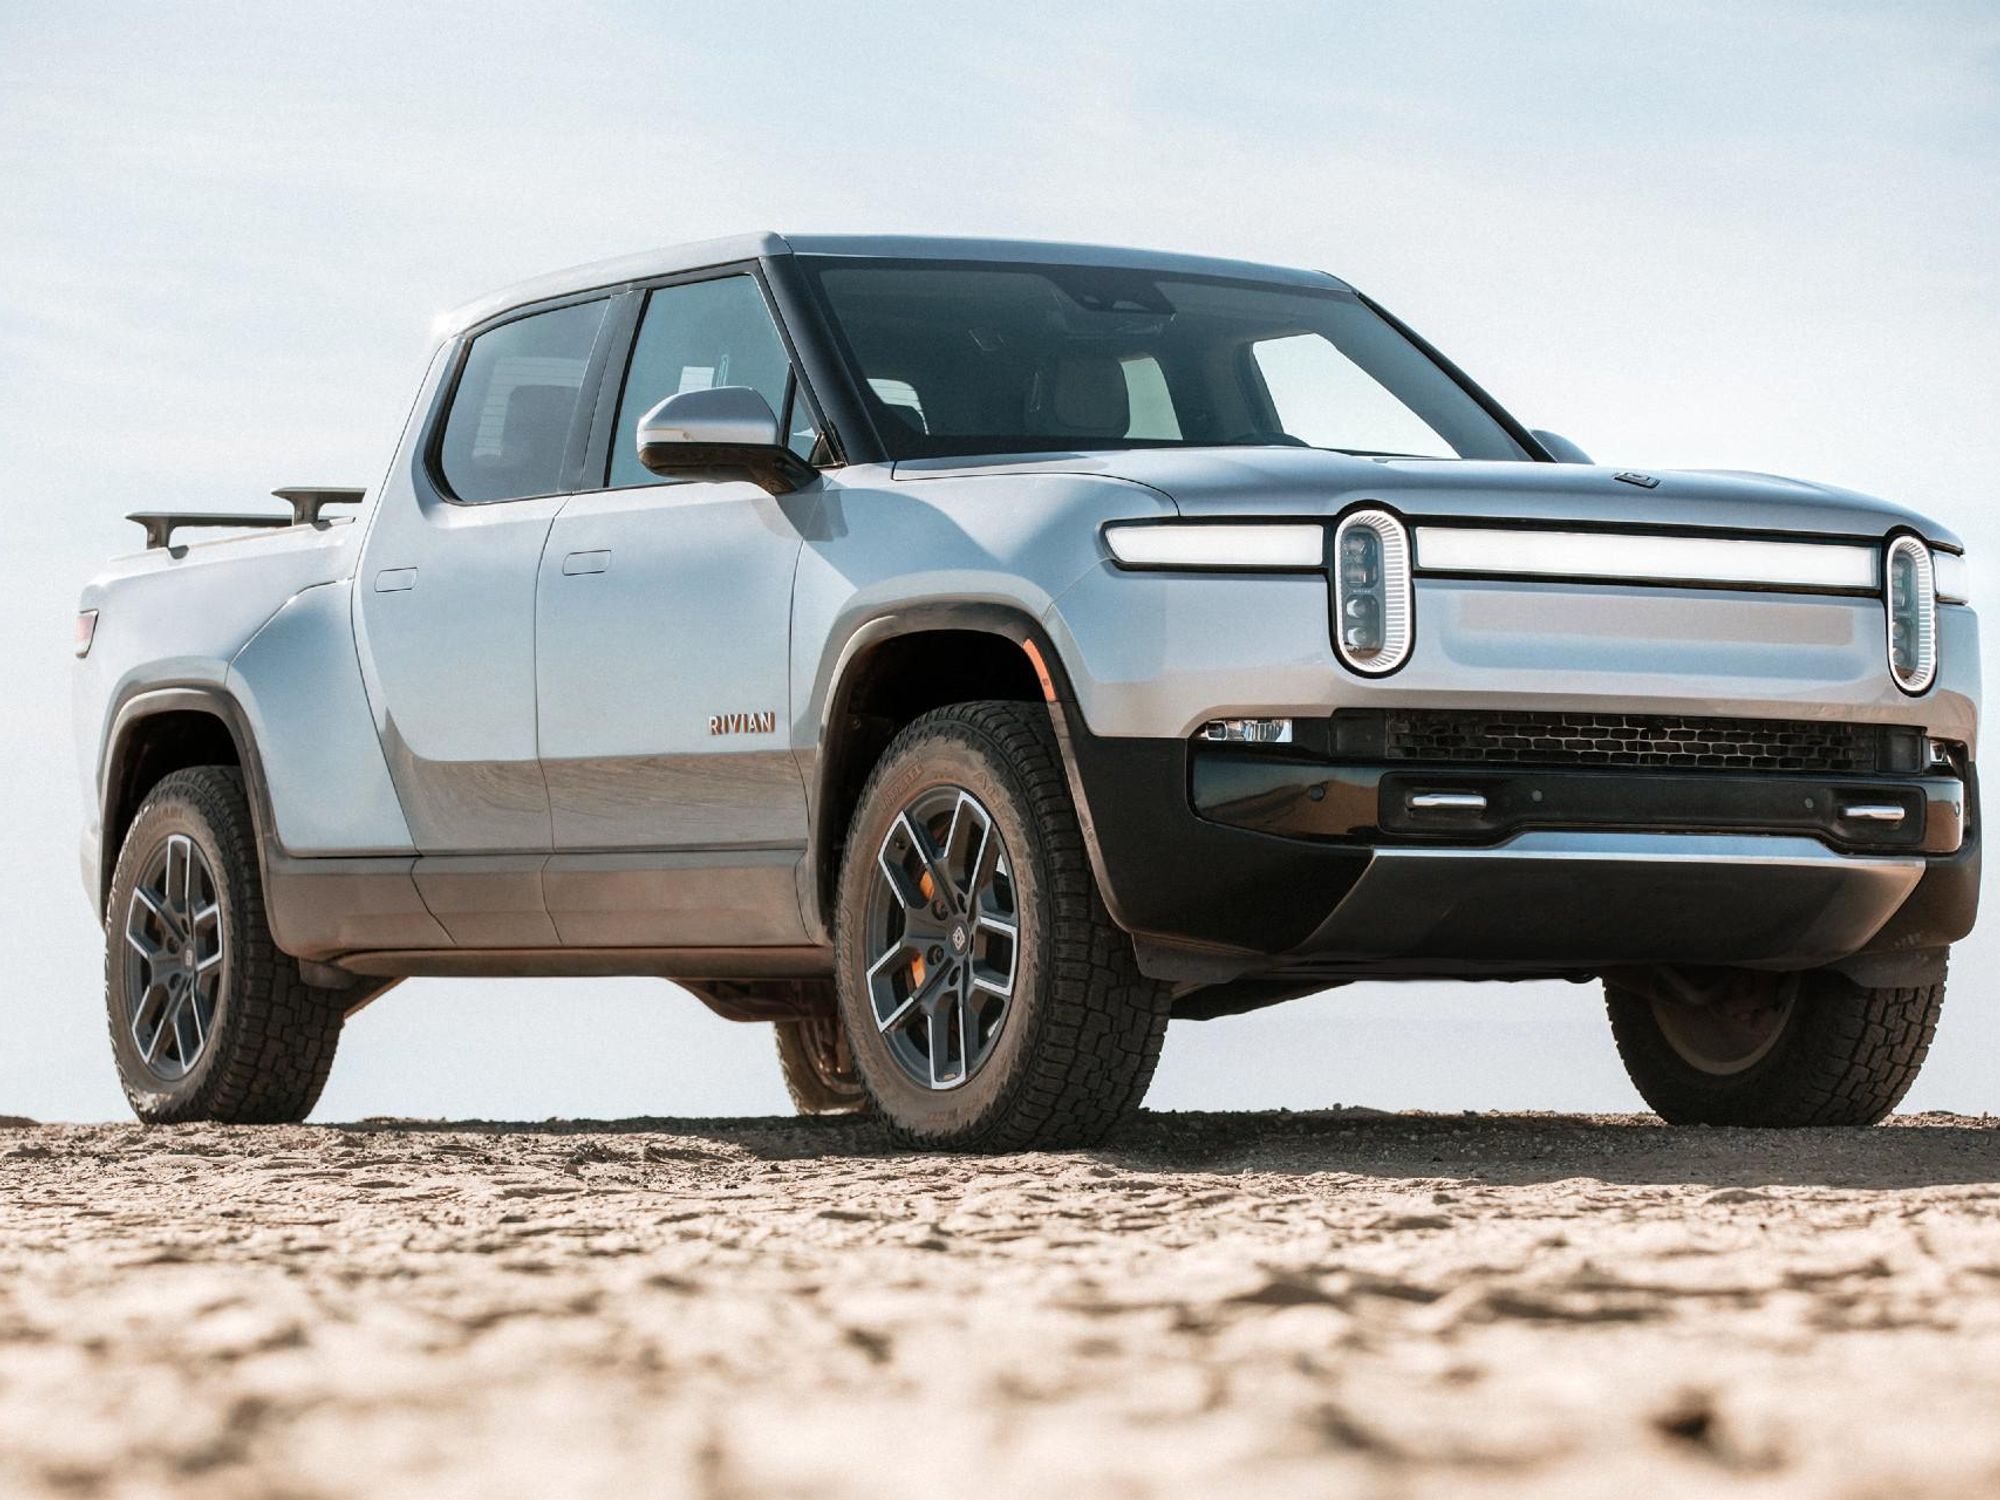 Rivian Honors Original Prices and Offers Discounts to Pre-Orders - A Commitment to Customer Satisfaction